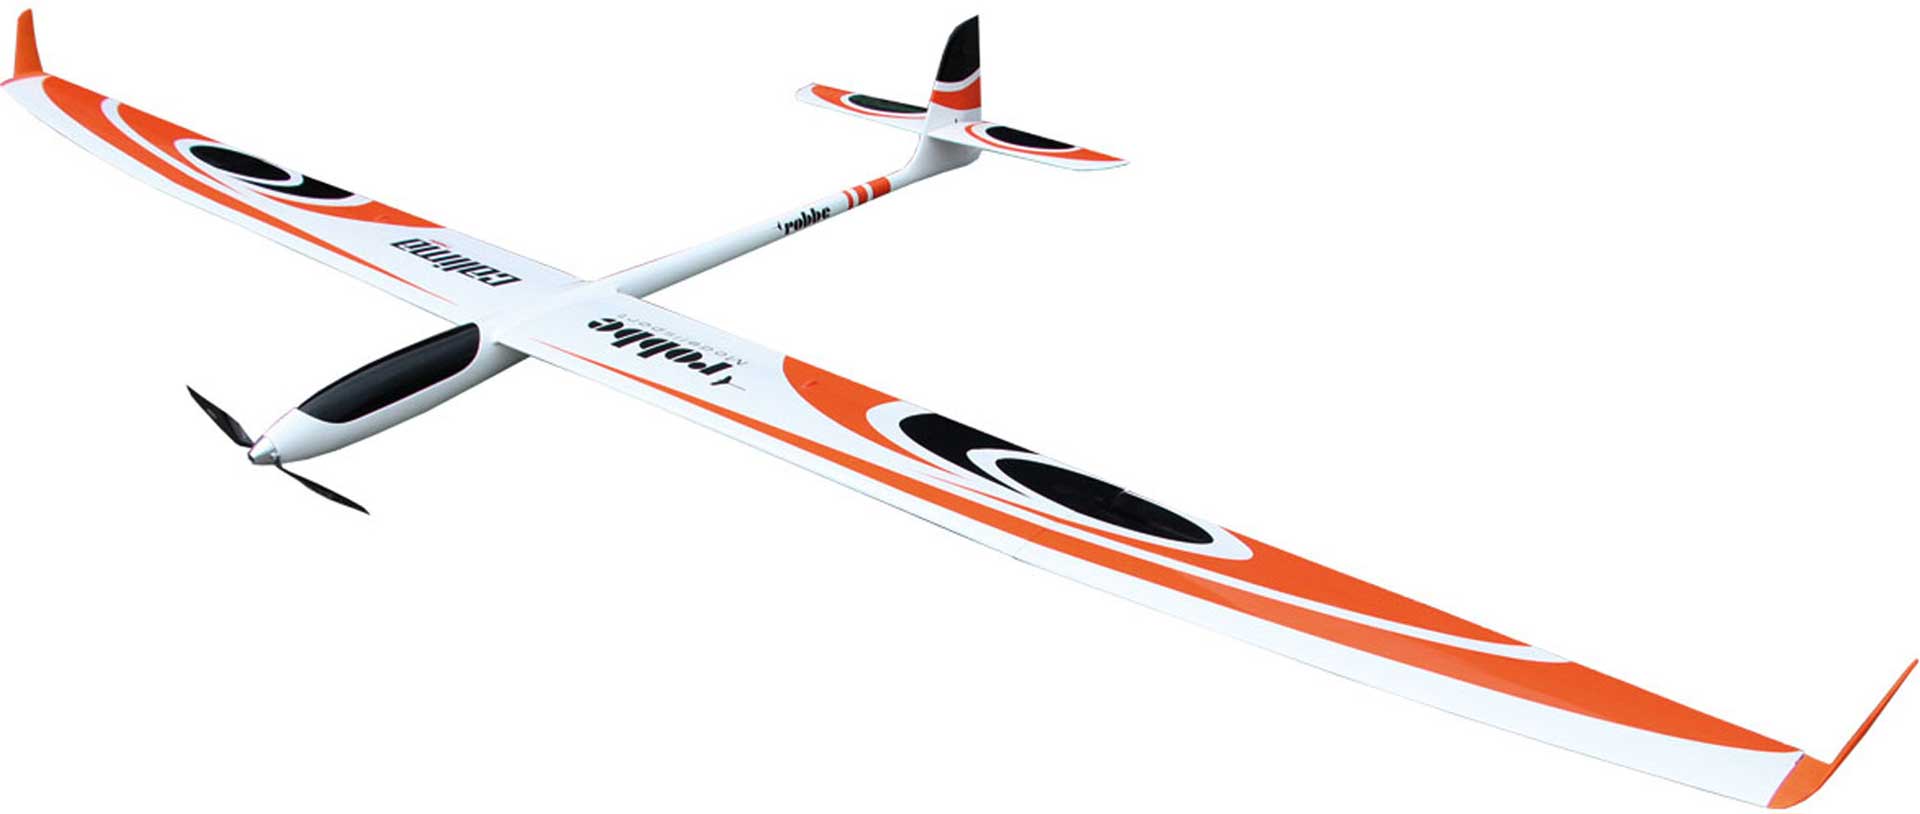 Robbe Modellsport CALIMA ARF HIGH-PERFORMANCE GLIDER WITH 4-FLAP WING